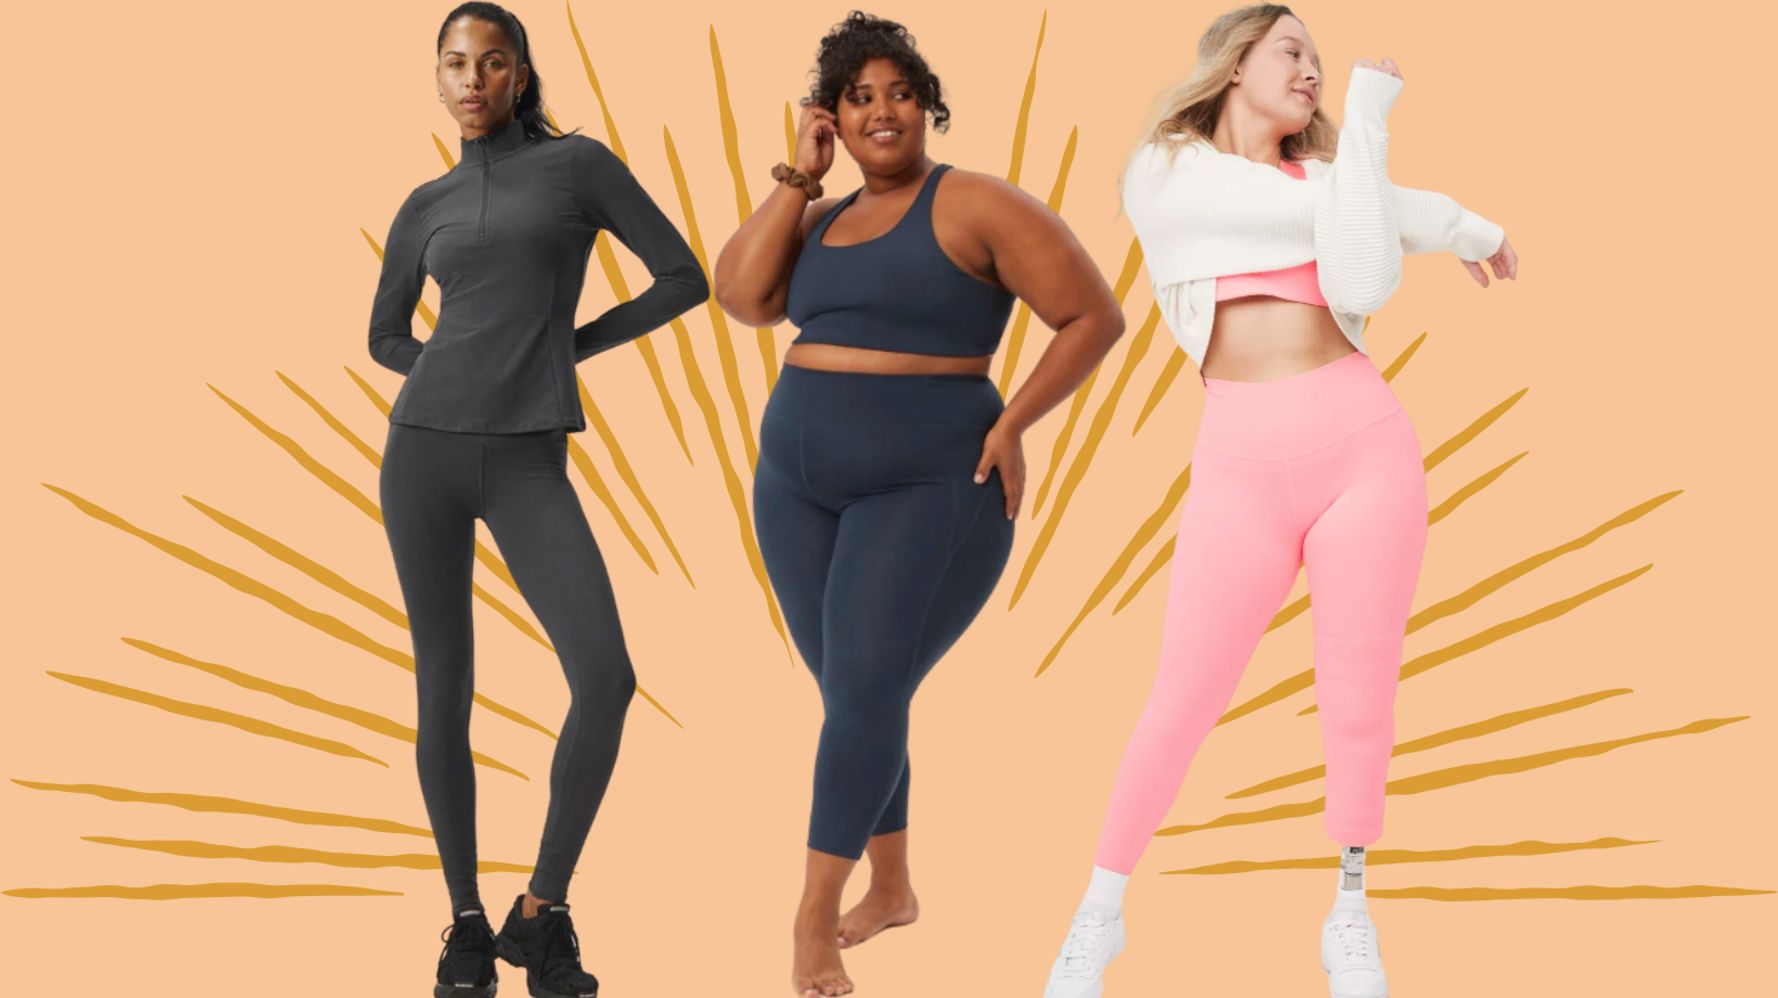 Lululemon files lawsuit against Ross Stores over 'lowest-quality' knock-off  leggings